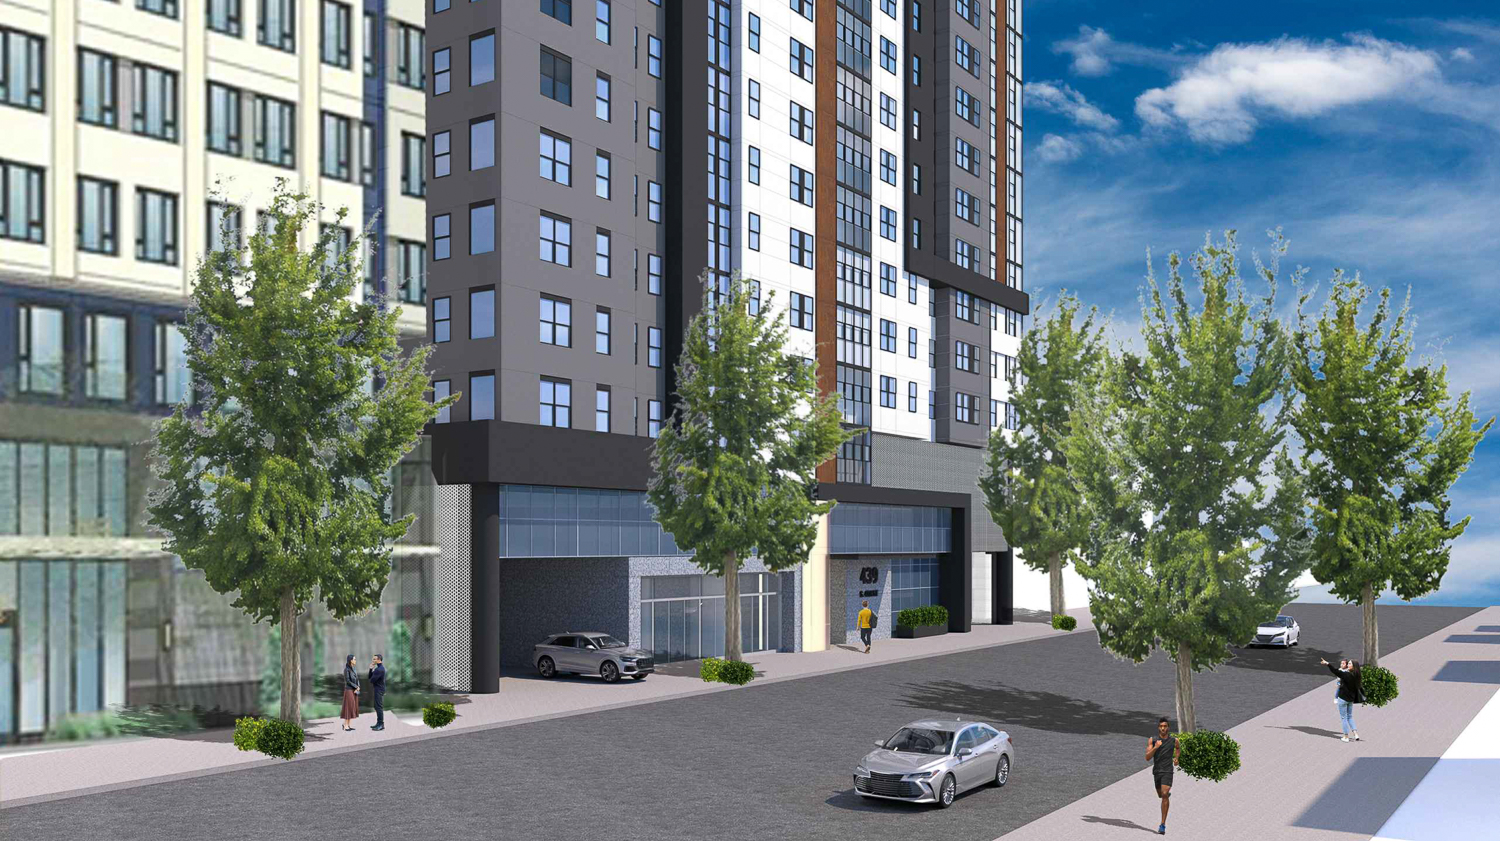 439 South 4th Street streetscape view, rendering by SCDC